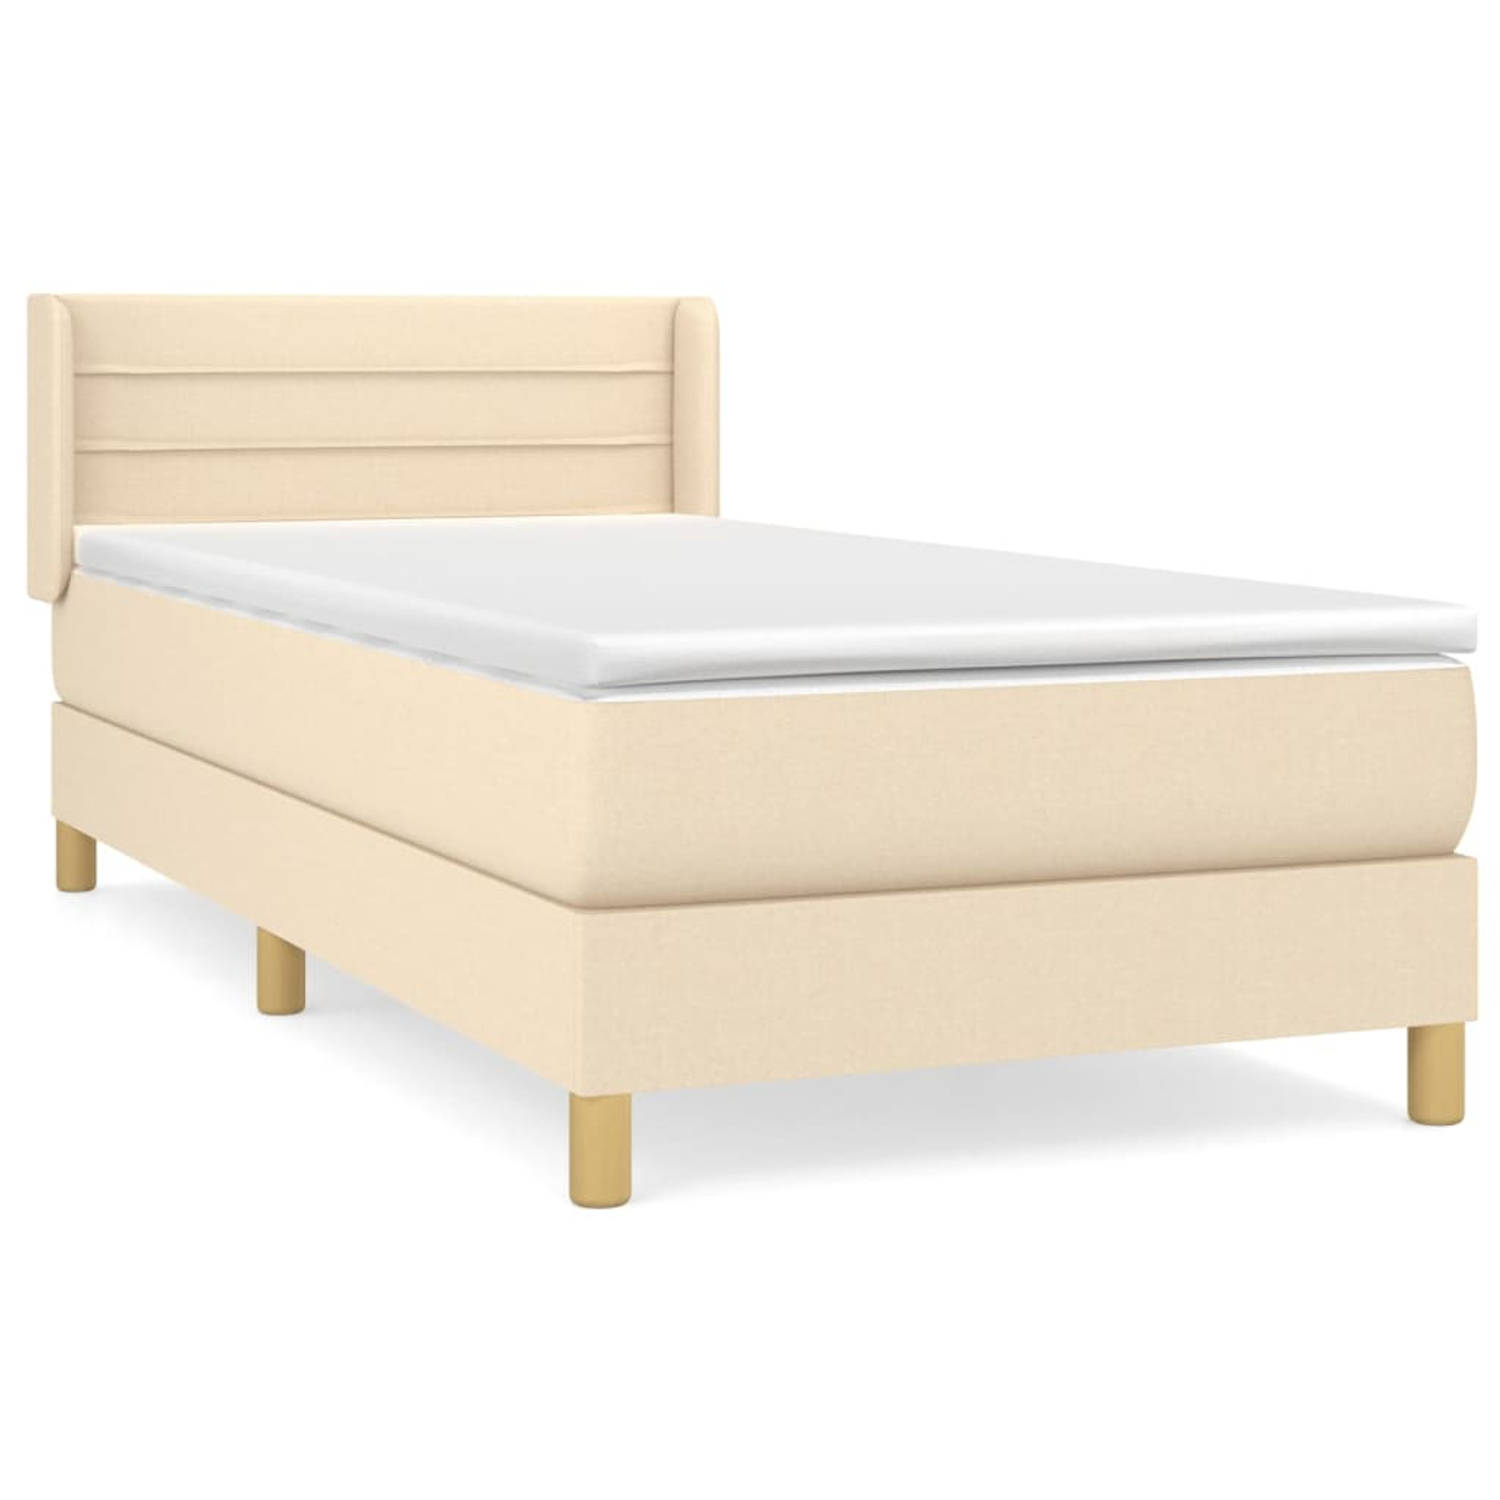 The Living Store Boxspringbed - Comfort - Bed - 203 x 93 x 78/88 cm - Crème